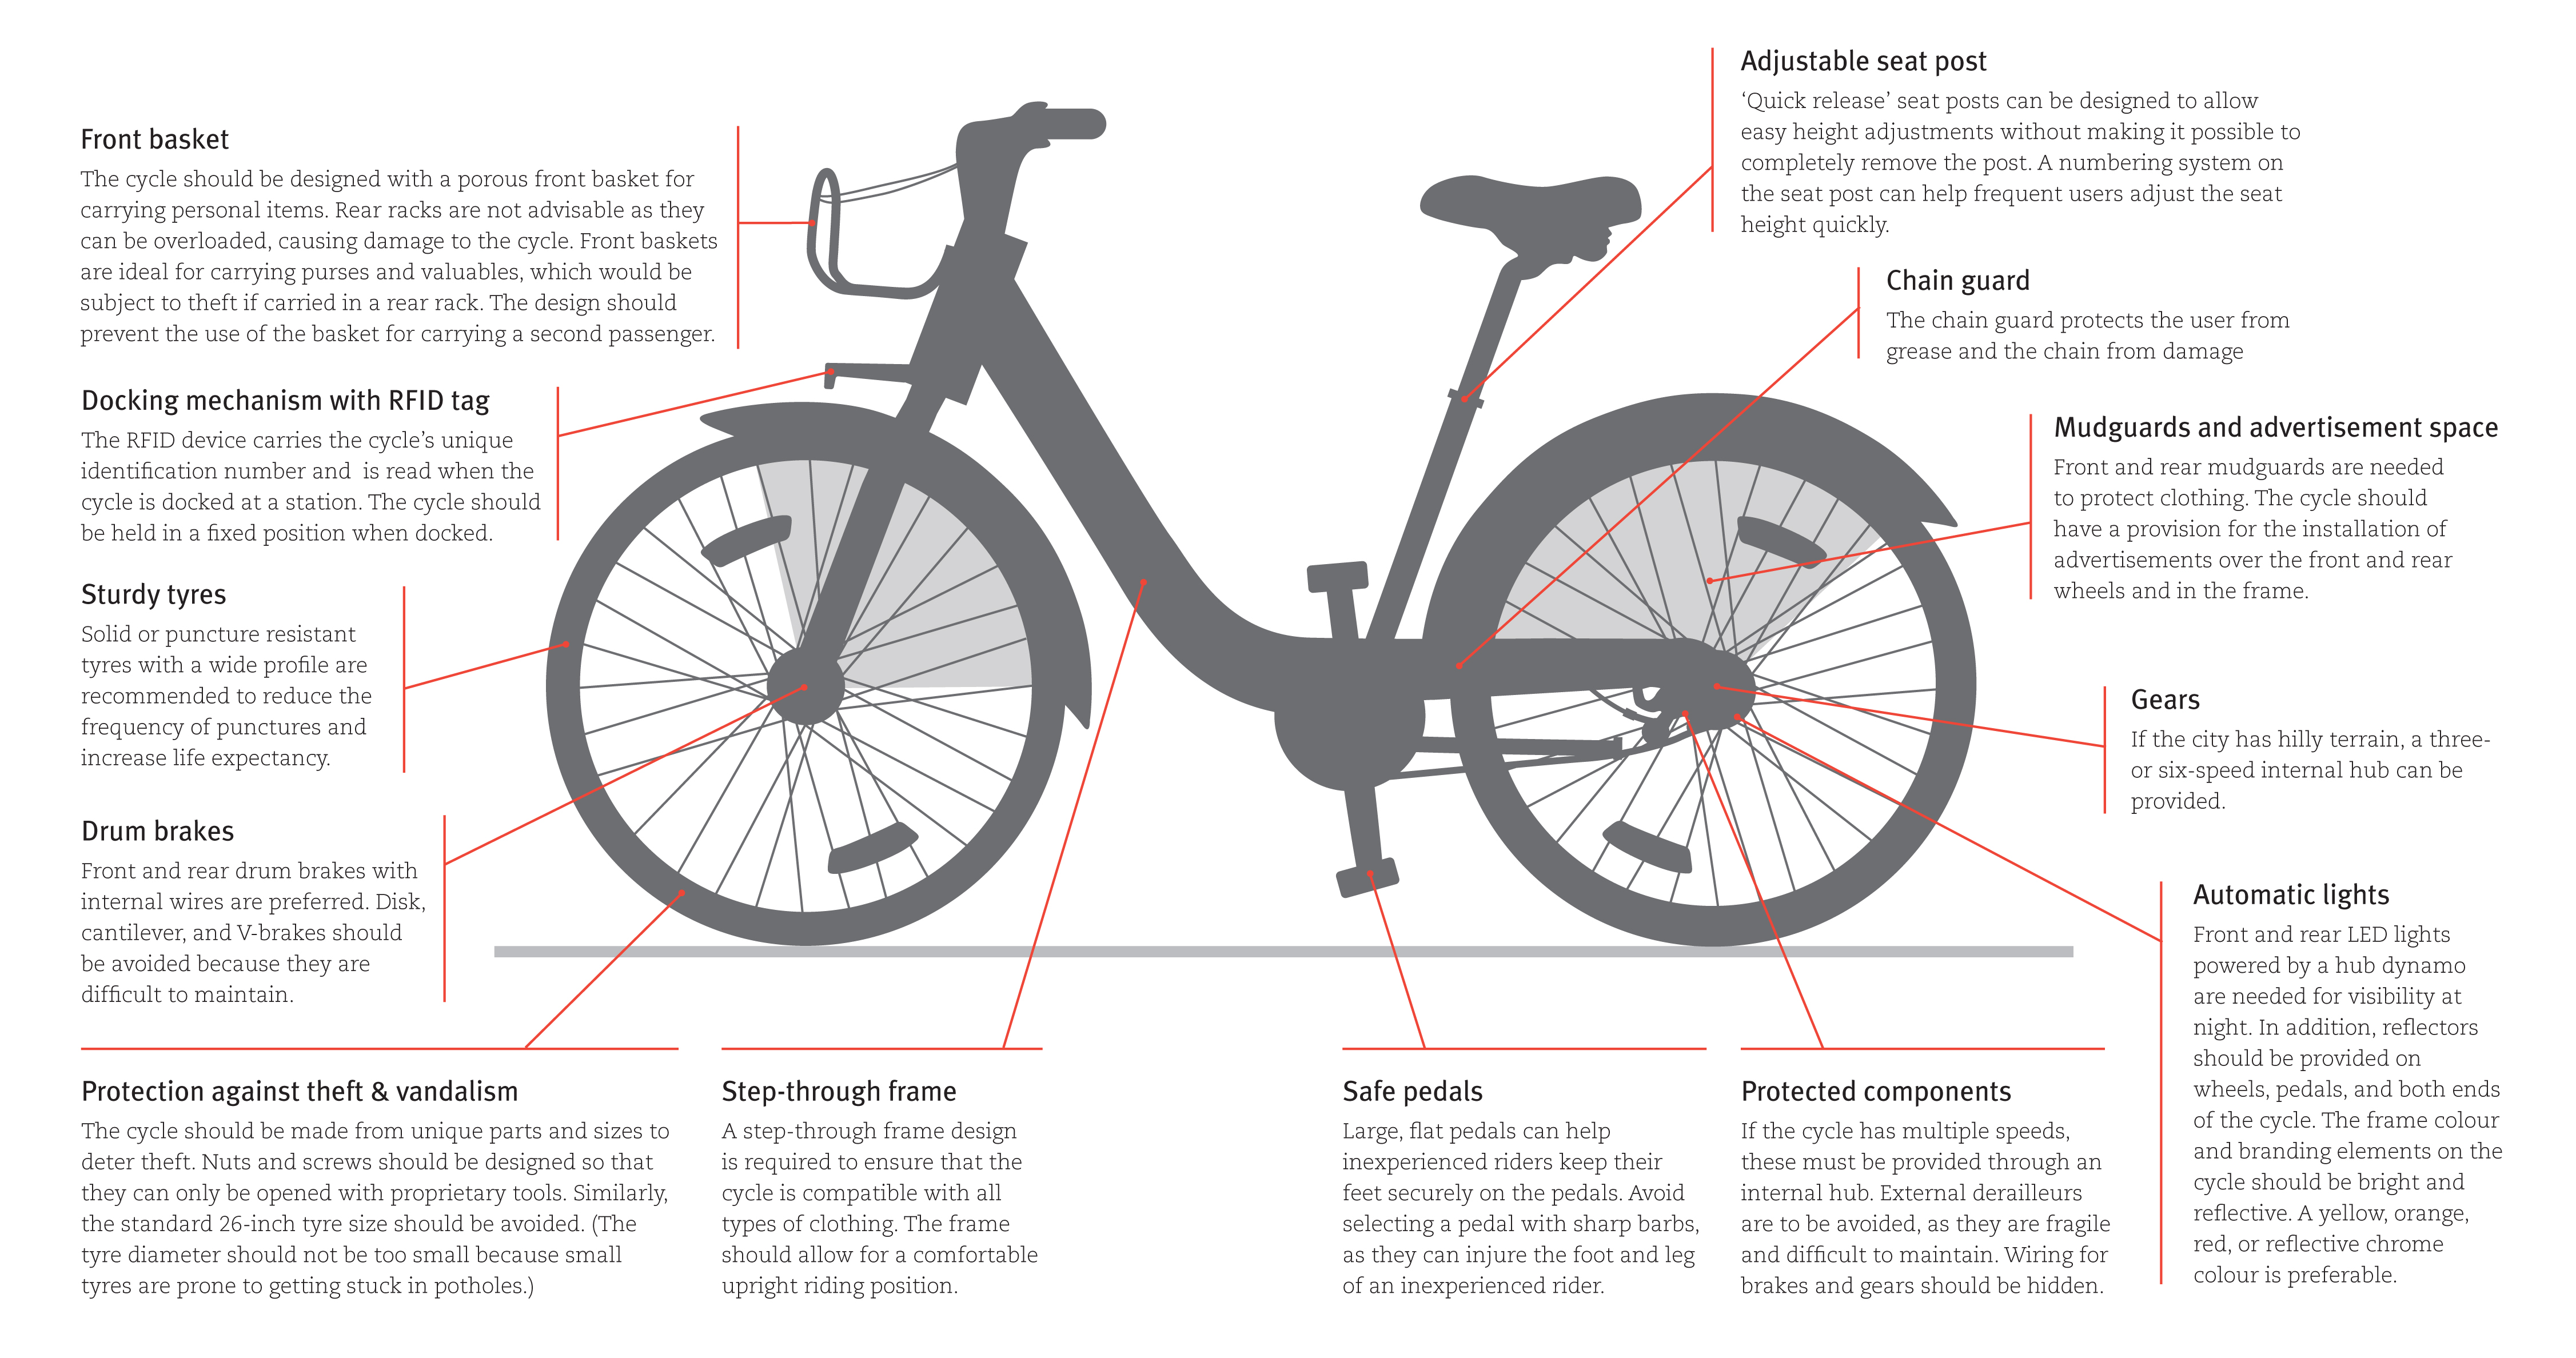 Public cycle sharing cyle parts